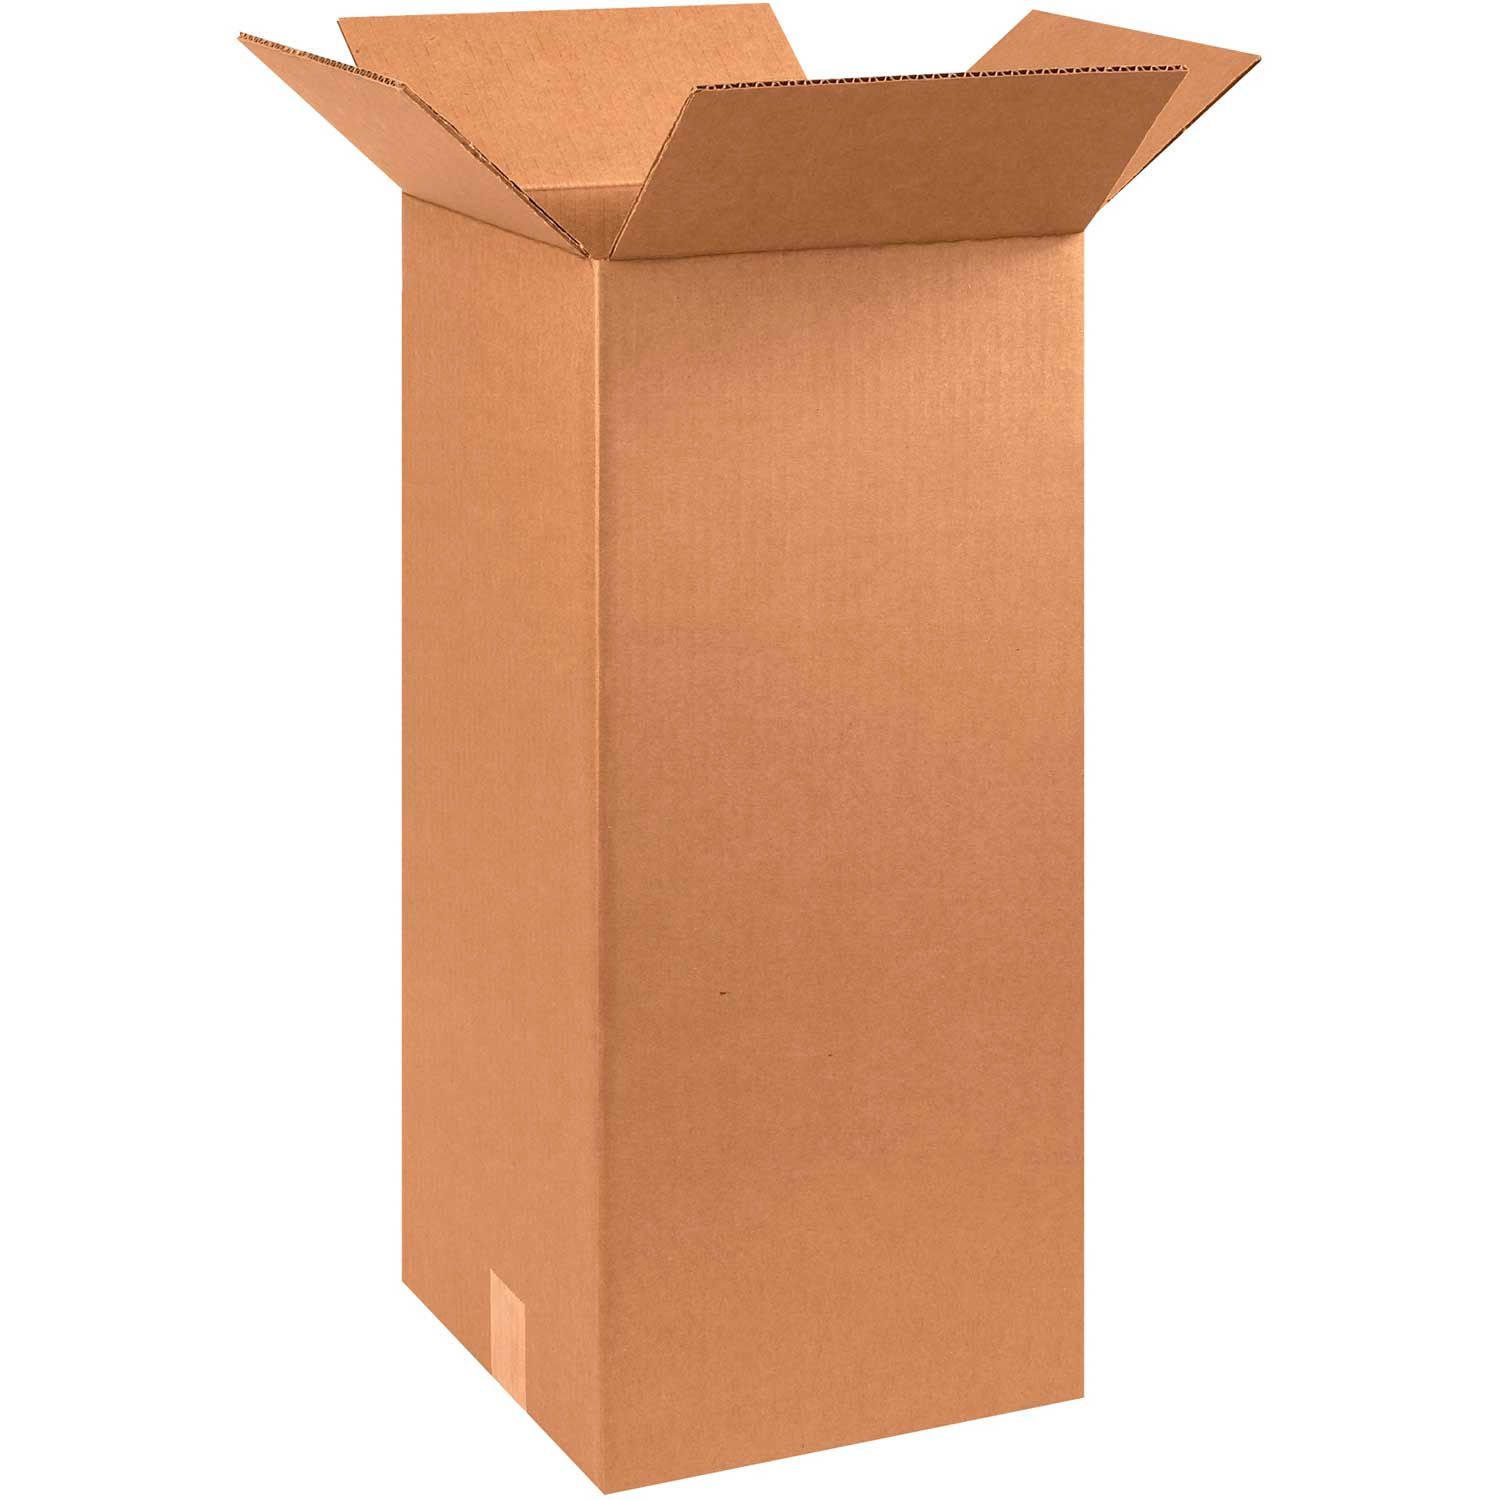 Lot of 10" x 10" x 24" Tall Cardboard Corrugated Boxes ECT-32 65 lbs Capacity